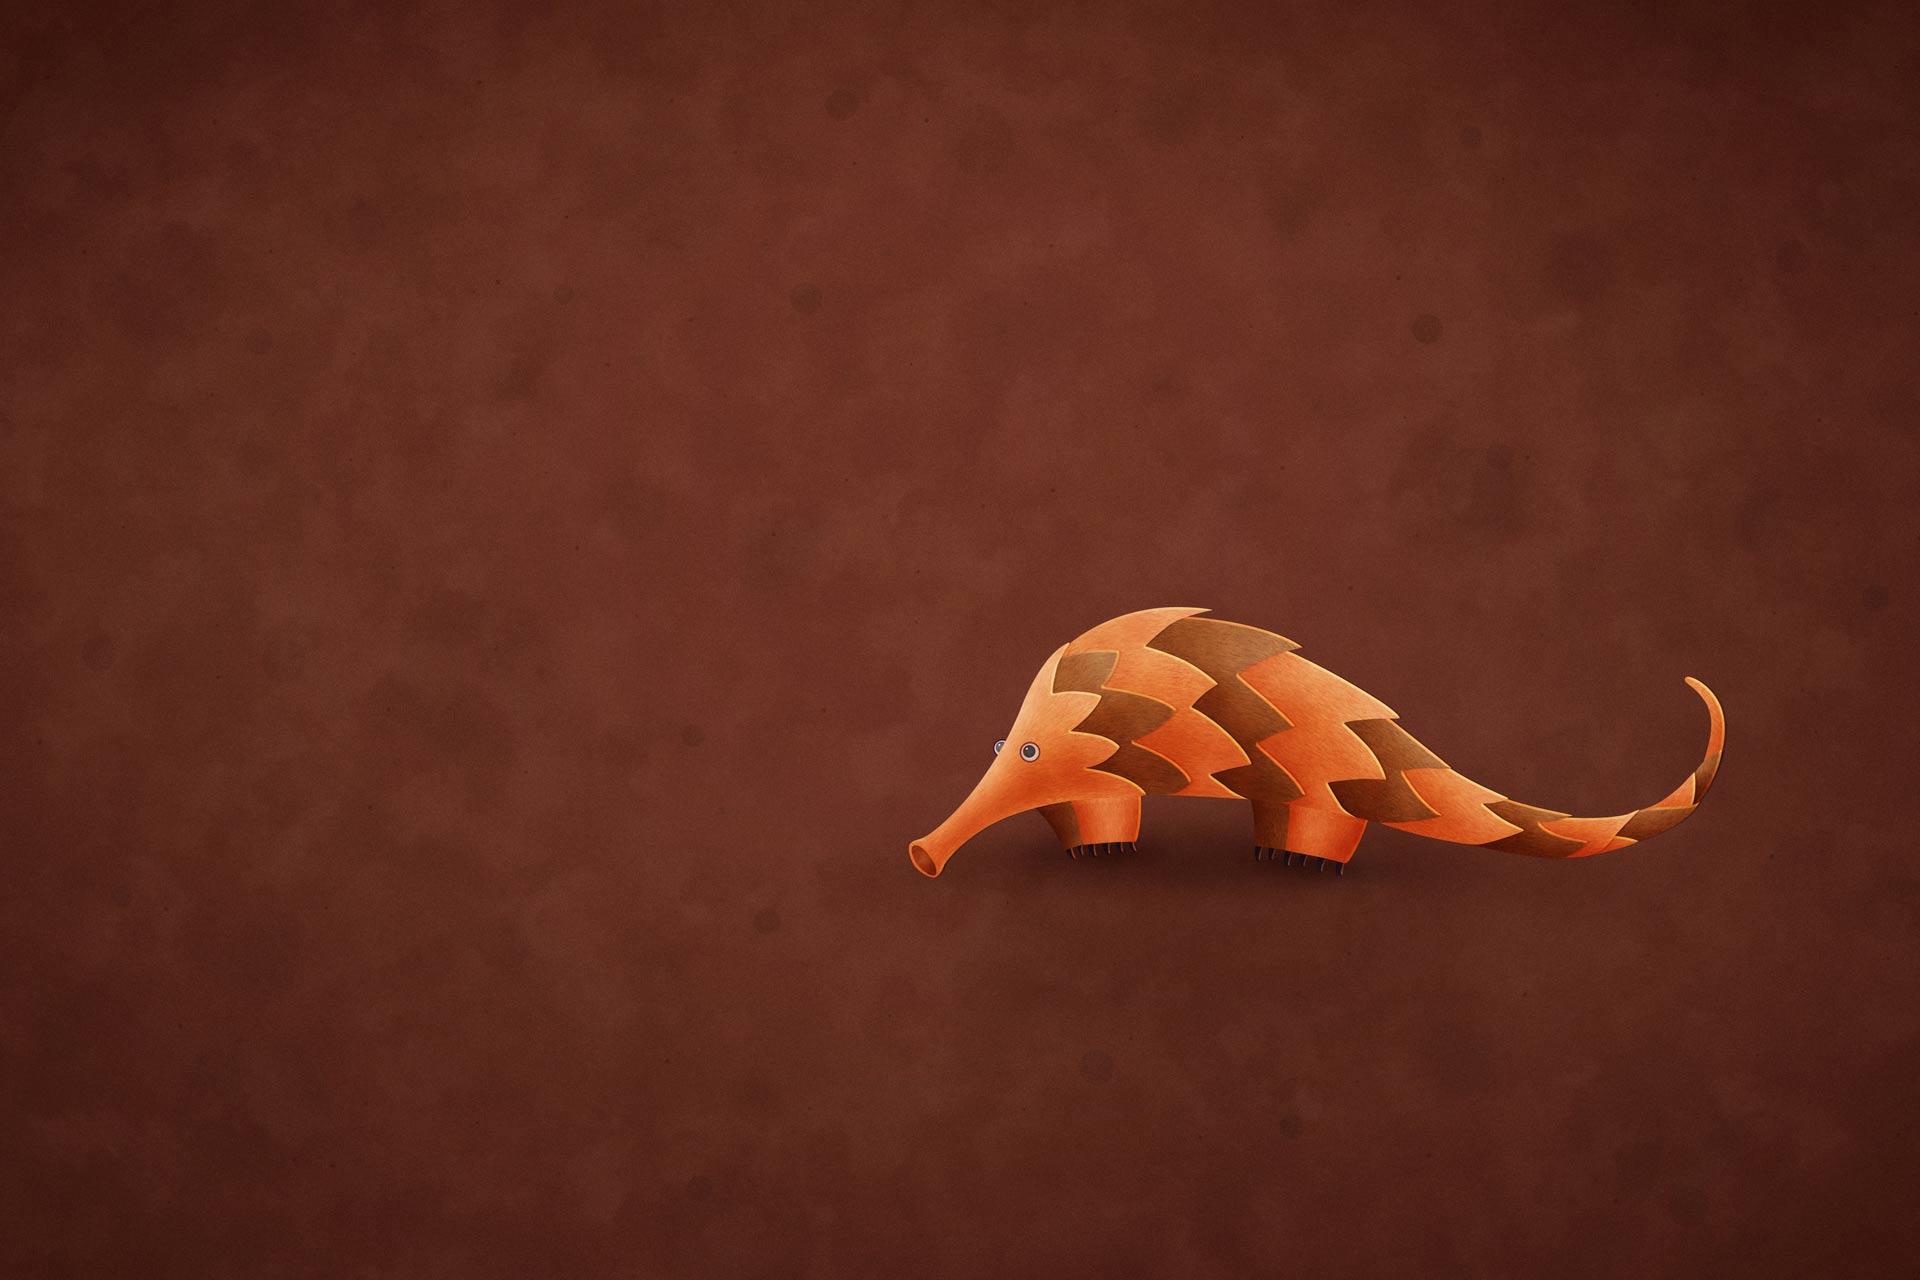 ... new wallpapers in ubuntu 12 04 precise pangolin the old wallpapers if